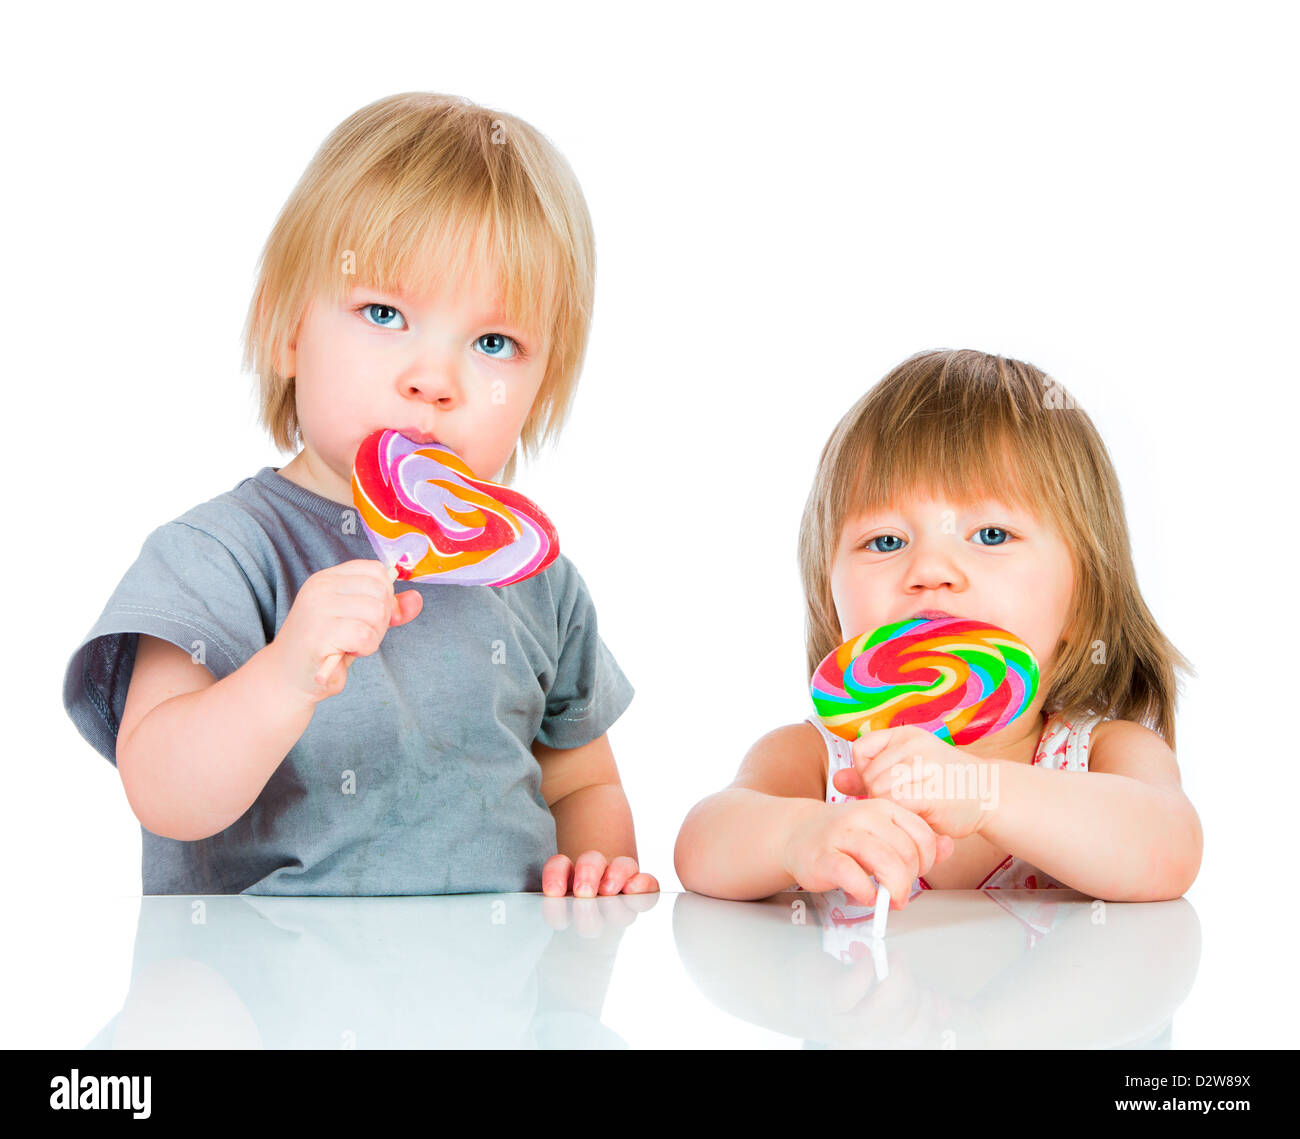 Babies eating a sticky lollipop on white background Stock Photo